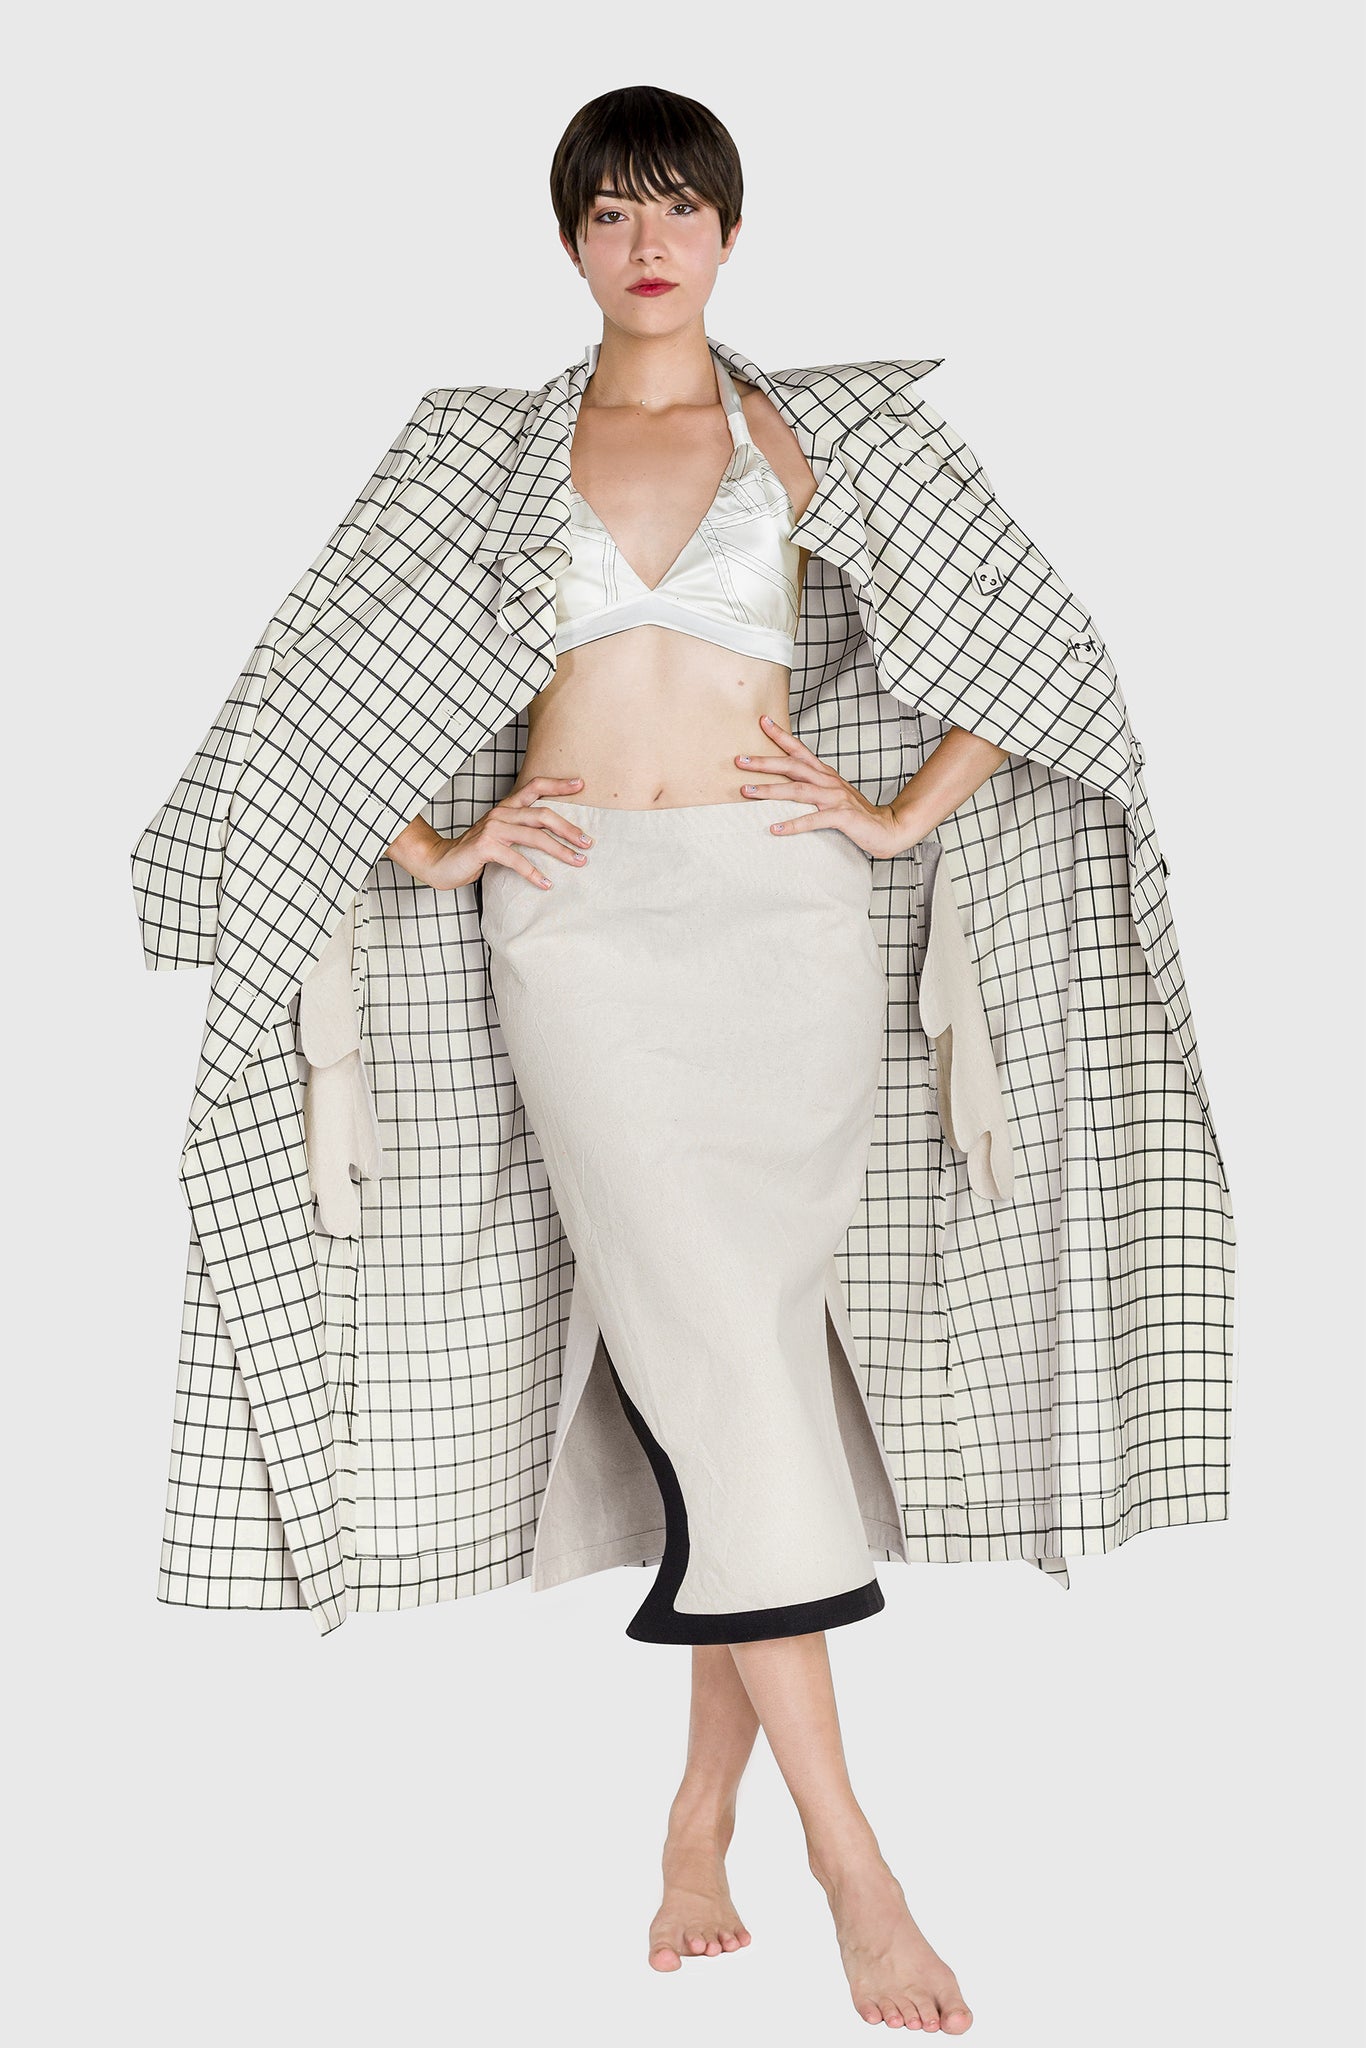 oversized trench coat, grid pattern wool, vintage cut, oversized collar, large collar, side pockets shaped as hands, mid-length, super elegant, black and white colors, style with skirts and tops, great for spring summer 